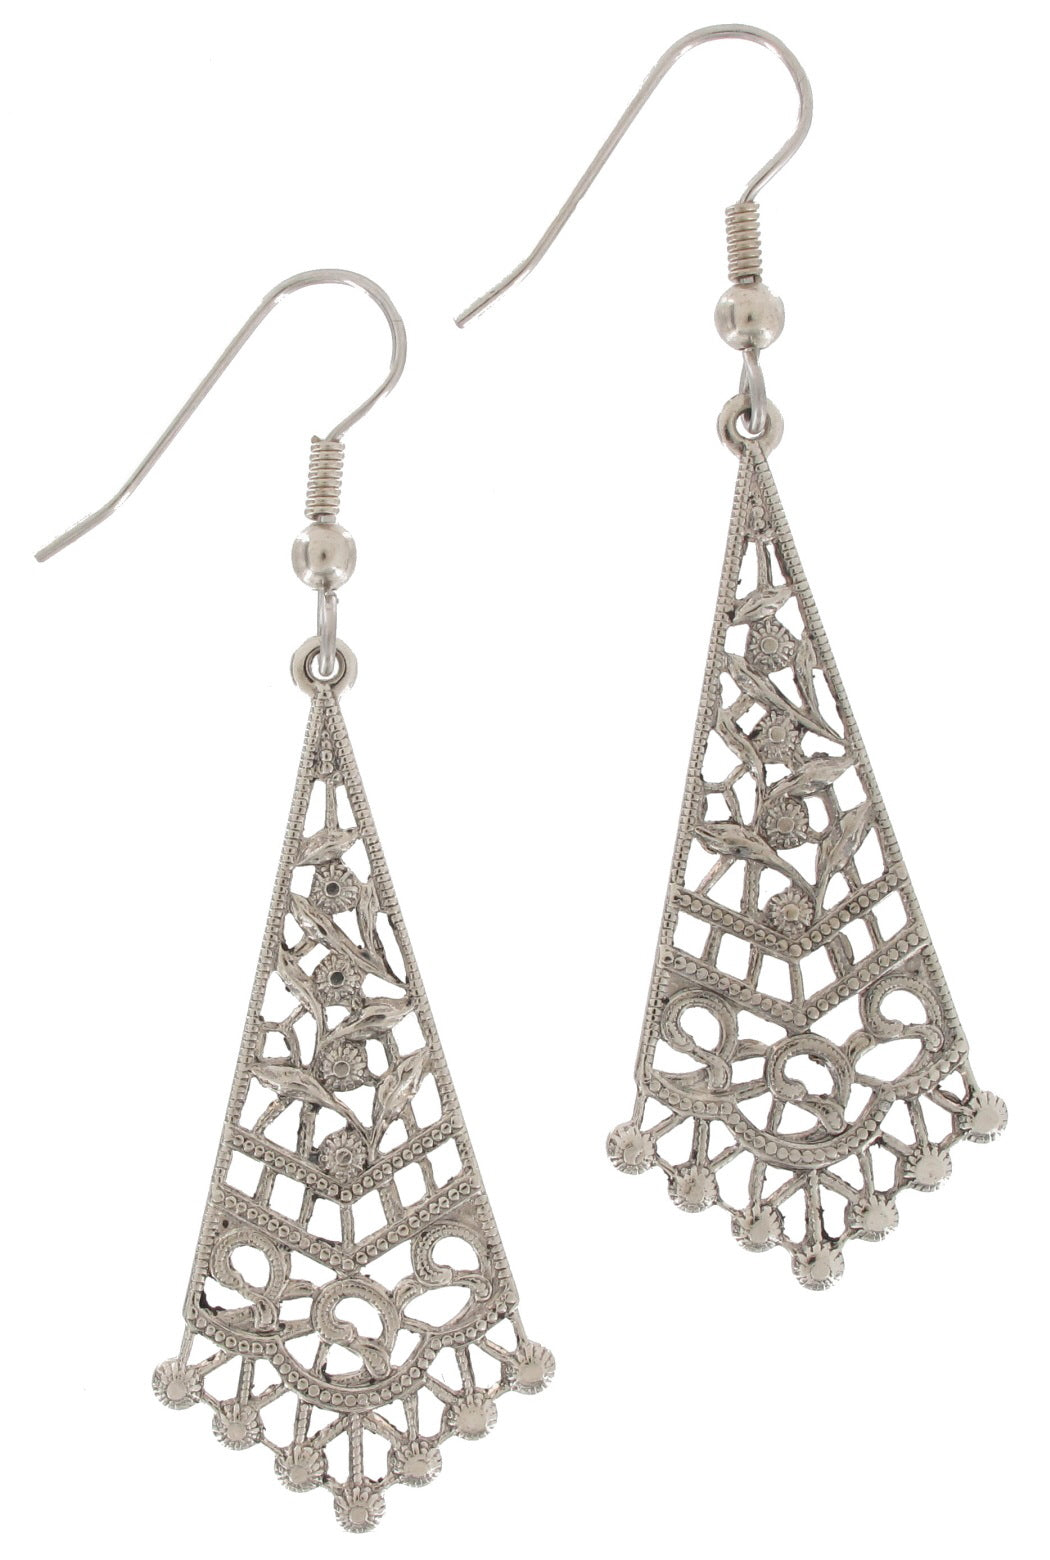 Ky & Co Filigree Openwork Floral Antiqued Silver Tone Dangle Earrings 2 3/8"